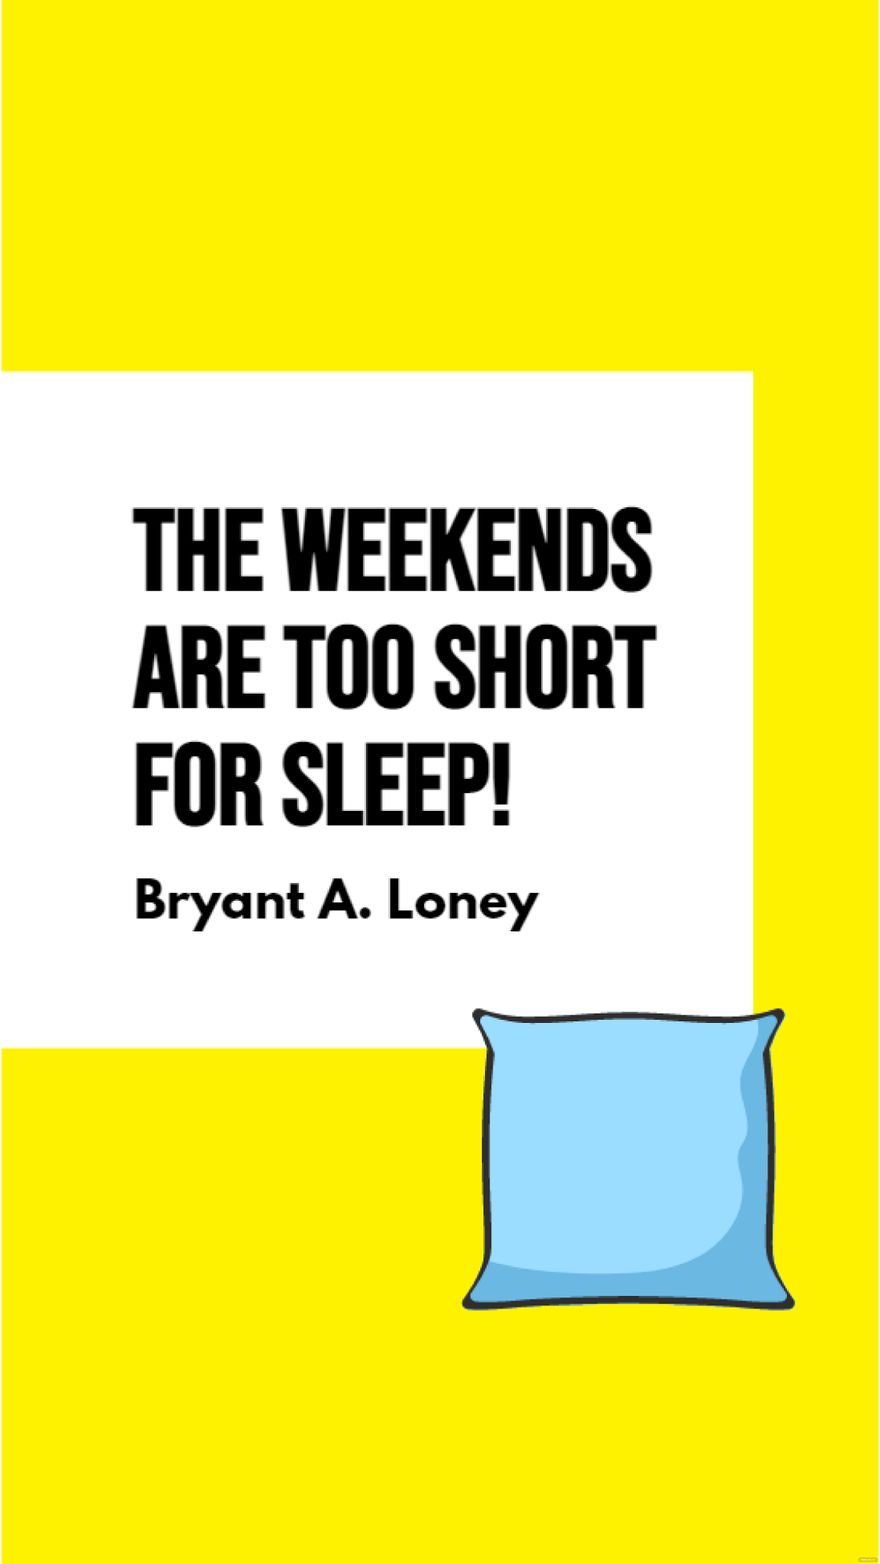 Free Bryant A. Loney - The weekends are too short for sleep! 